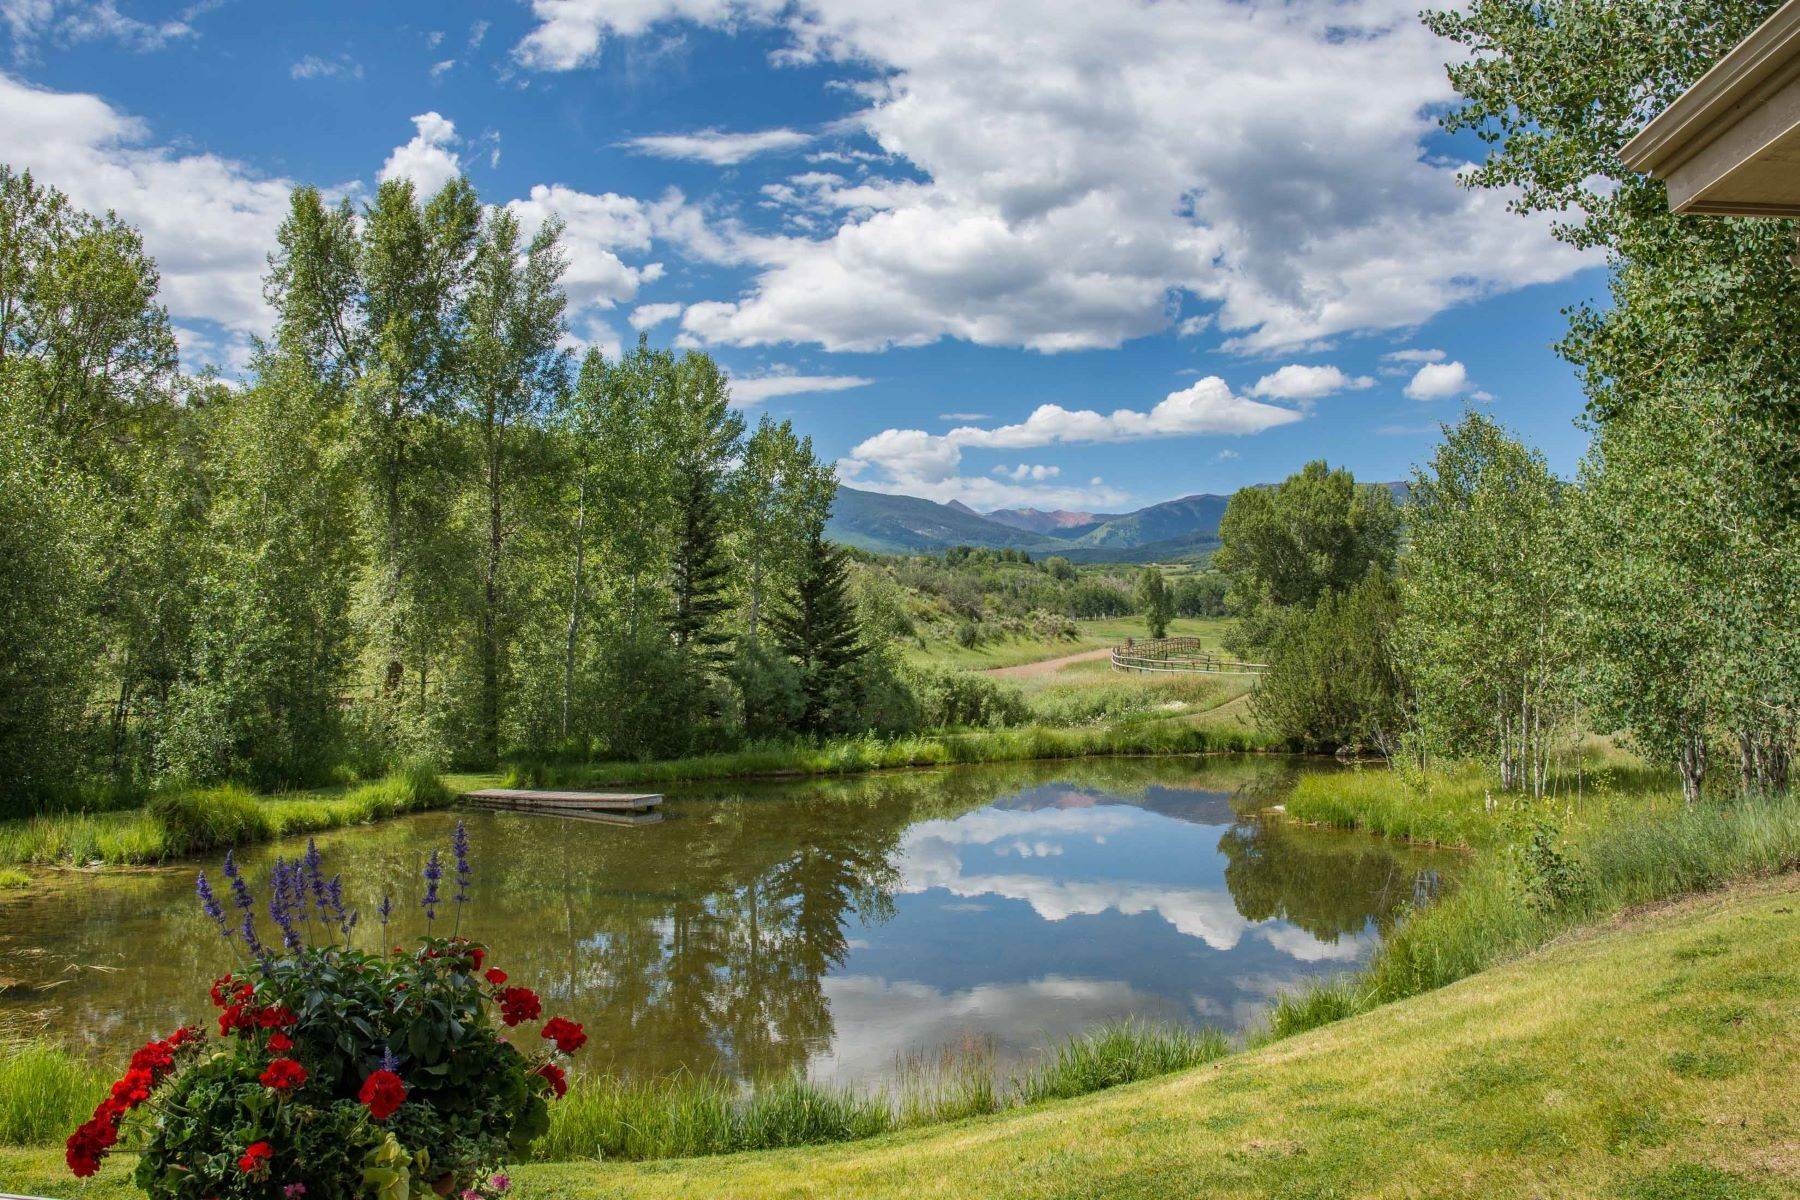 Земля для того Продажа на RARE and UNIQUE opportunity to own the heart of the renowned McCabe Ranch 1321 Elk Creek & TBD McCabe Ranch Old Snowmass, Колорадо 81654 Соединенные Штаты